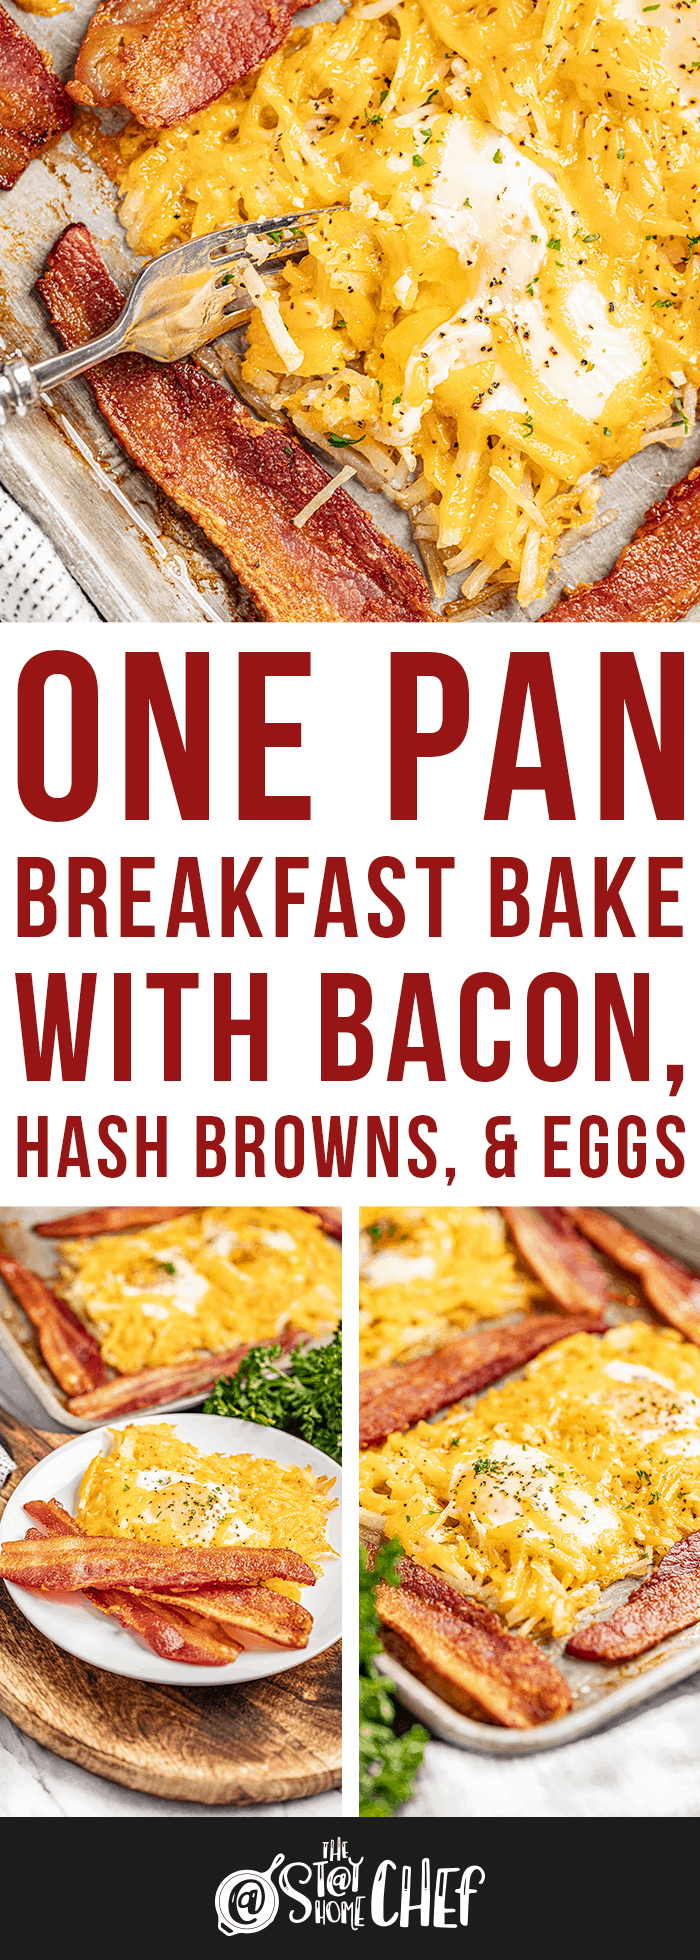 One Pan Breakfast Bake with Bacon, Hash Browns, and Eggs